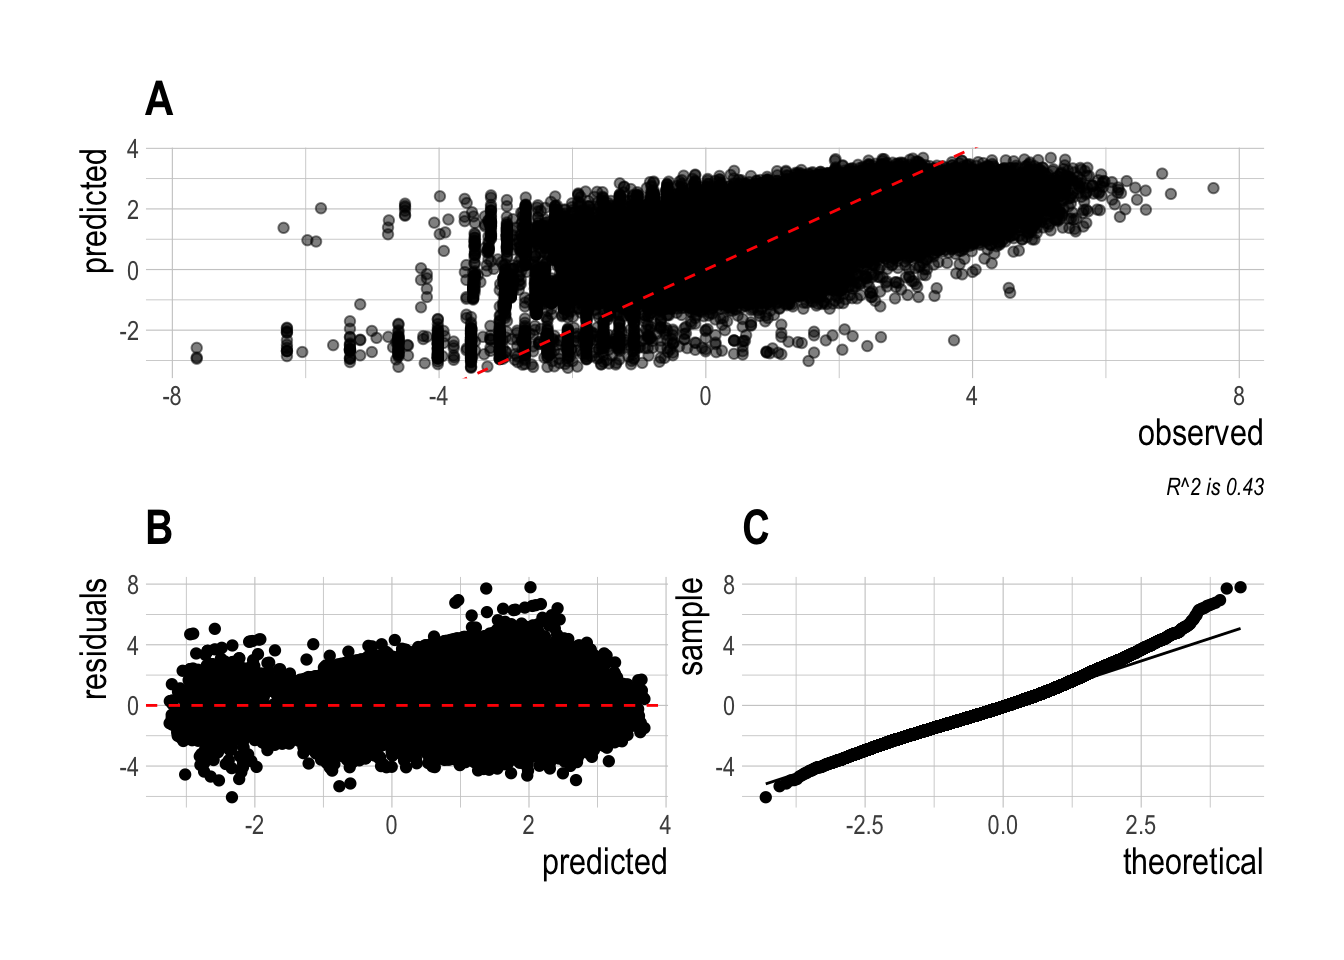 High level diagnostics for observed compontent of Delta-GLM: Observed vs predicted log densities (A), predicted log density vs residuals (B), and a normal qq-plot of the residuals (C)